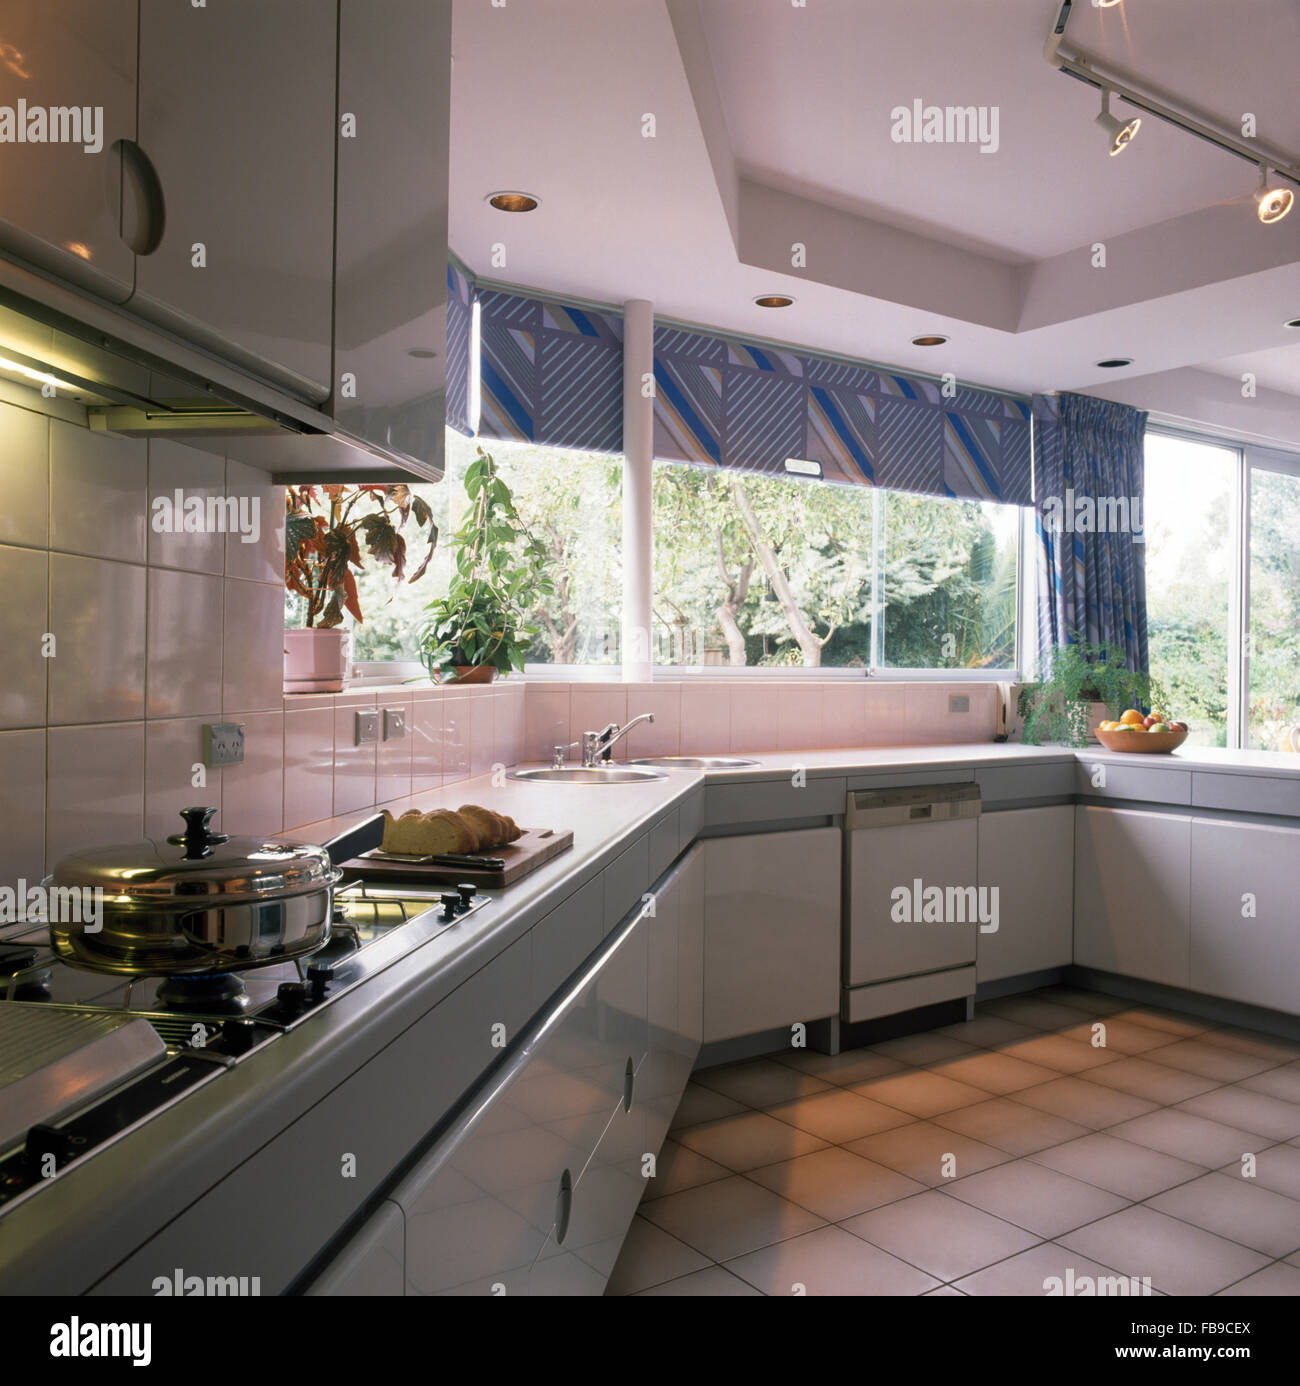 Blue blinds on windows in nineties kitchen with a tiled floor Stock Photo